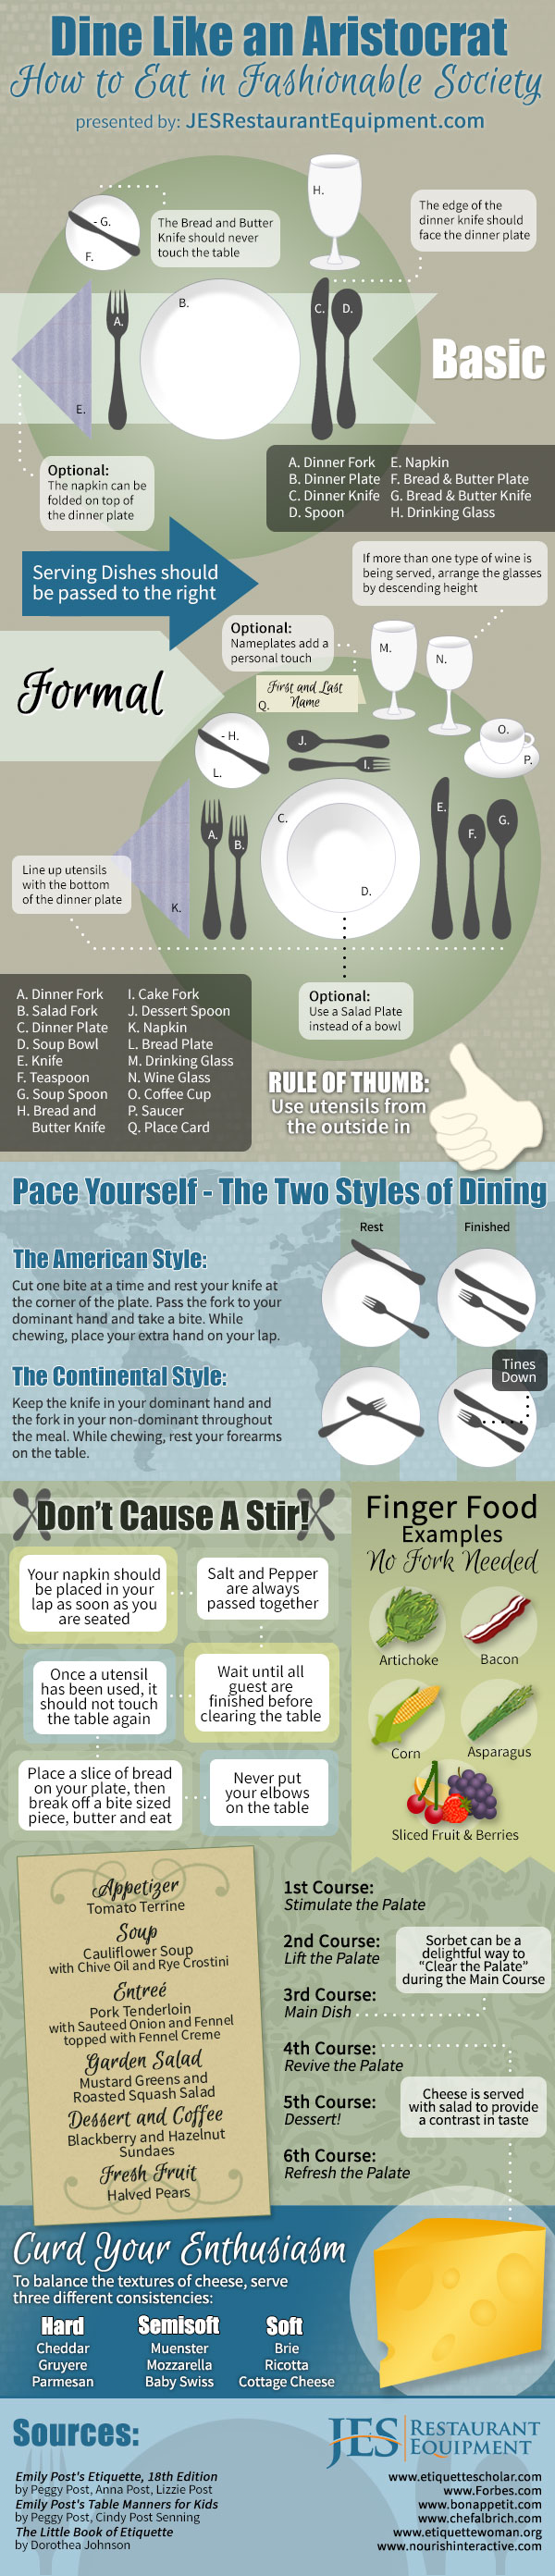 formal dining etiquette rules in graphic form